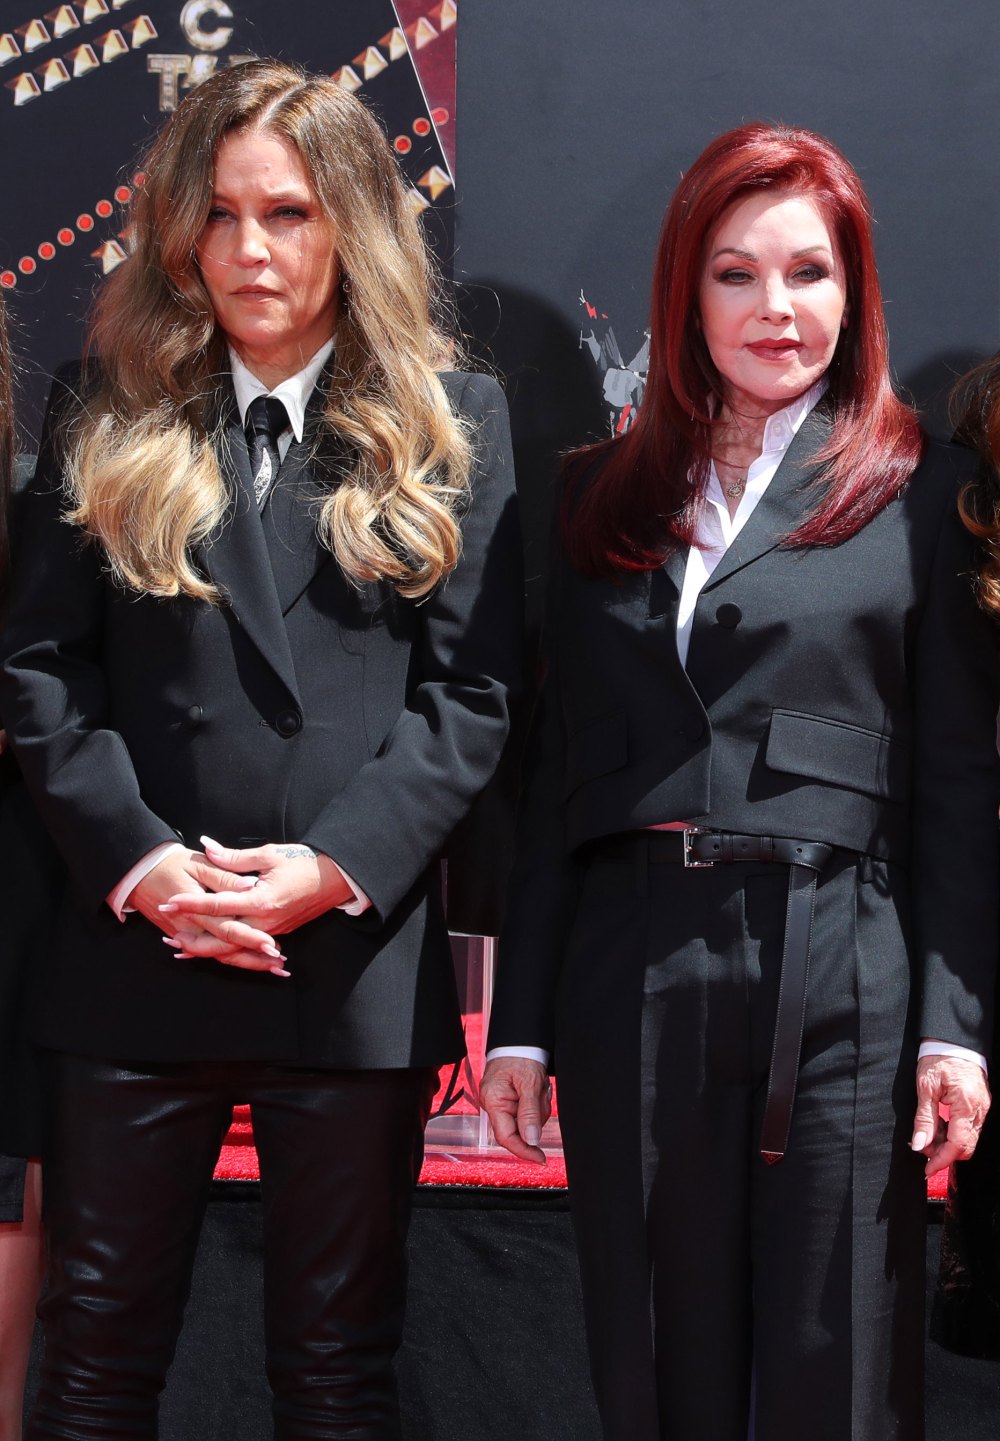 Priscilla Presley Asks for ‘Prayers’ After Confirming Daughter Lisa Marie Presley Was Rushed to Hospital- She’s ‘Receiving the Best Care’ - 082 Three Generations of Presley's Hand and Footprint Ceremony, TCL Chinese Theater, Los Angeles, California, USA - 21 Jun 2022